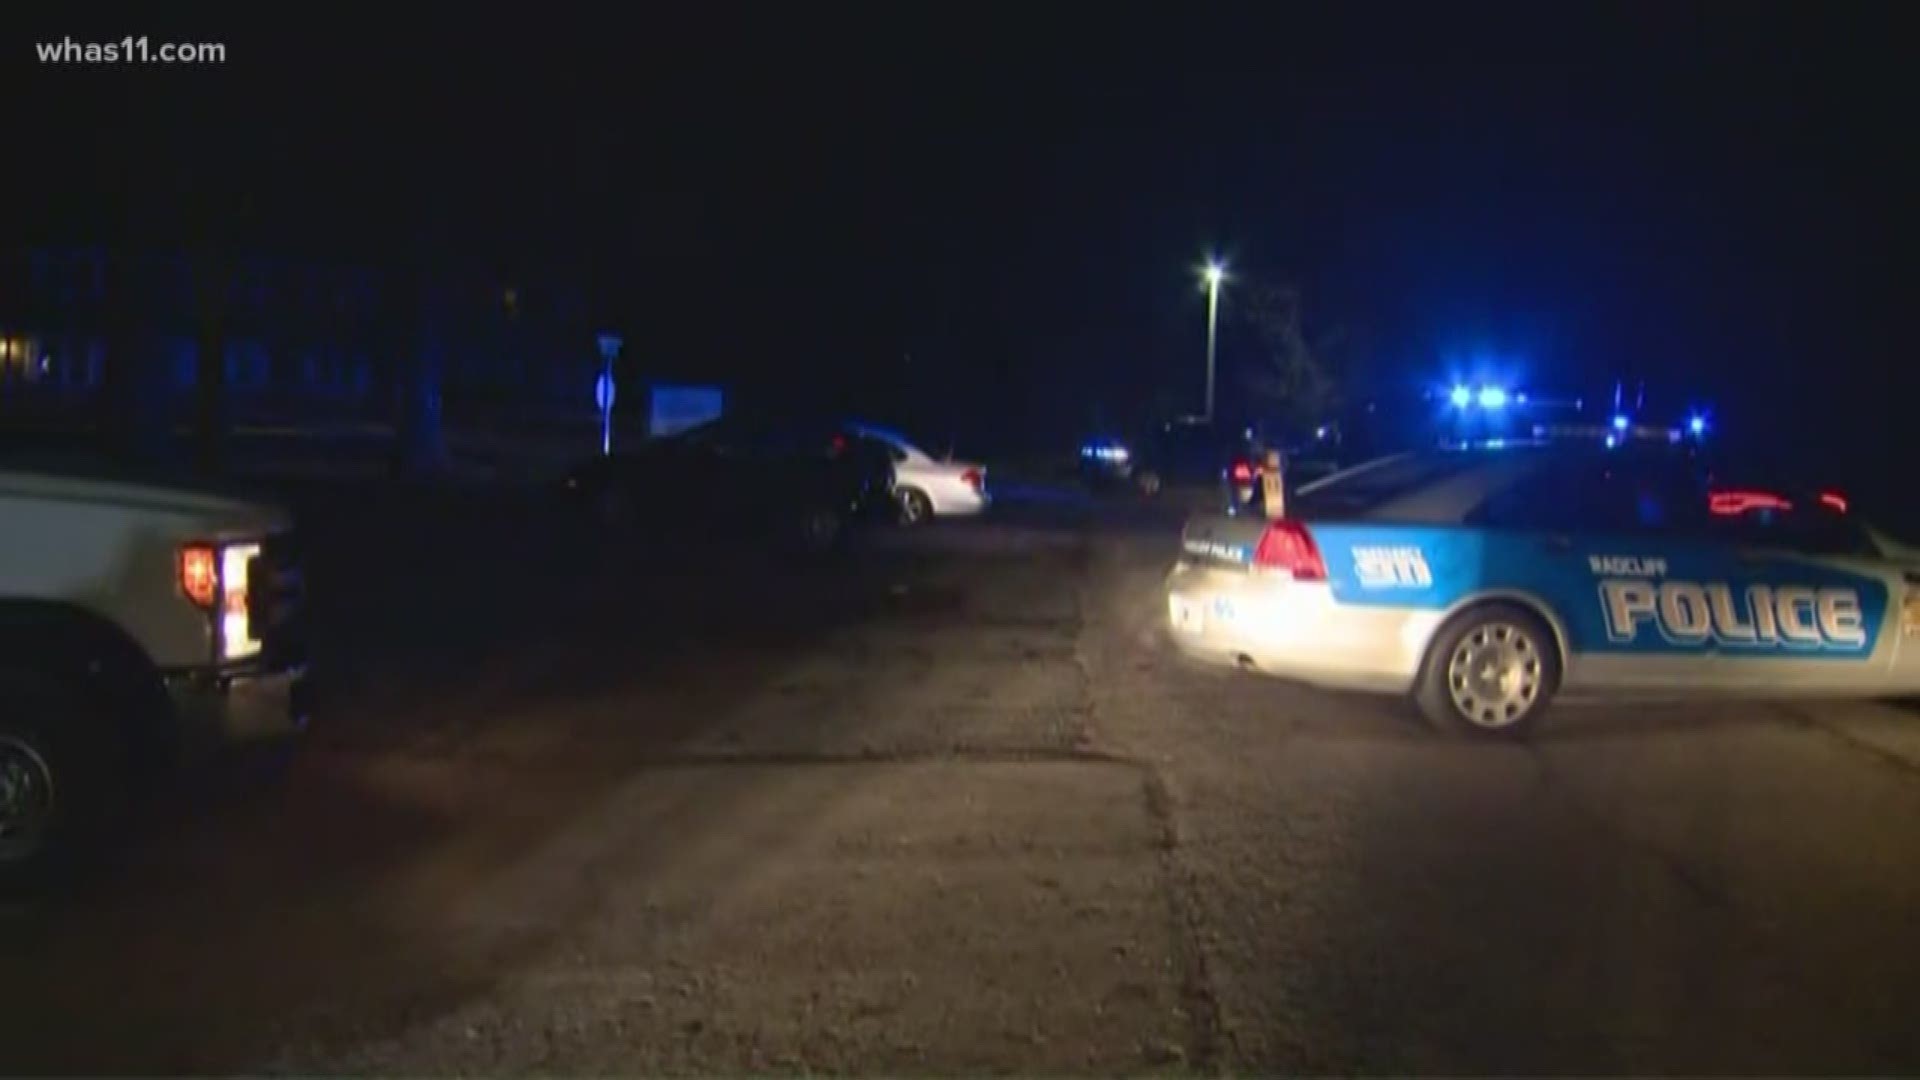 KSP has confirmed an officer-involved shooting in Radcliff a little after 2 a.m. Thursday, Jan. 23.